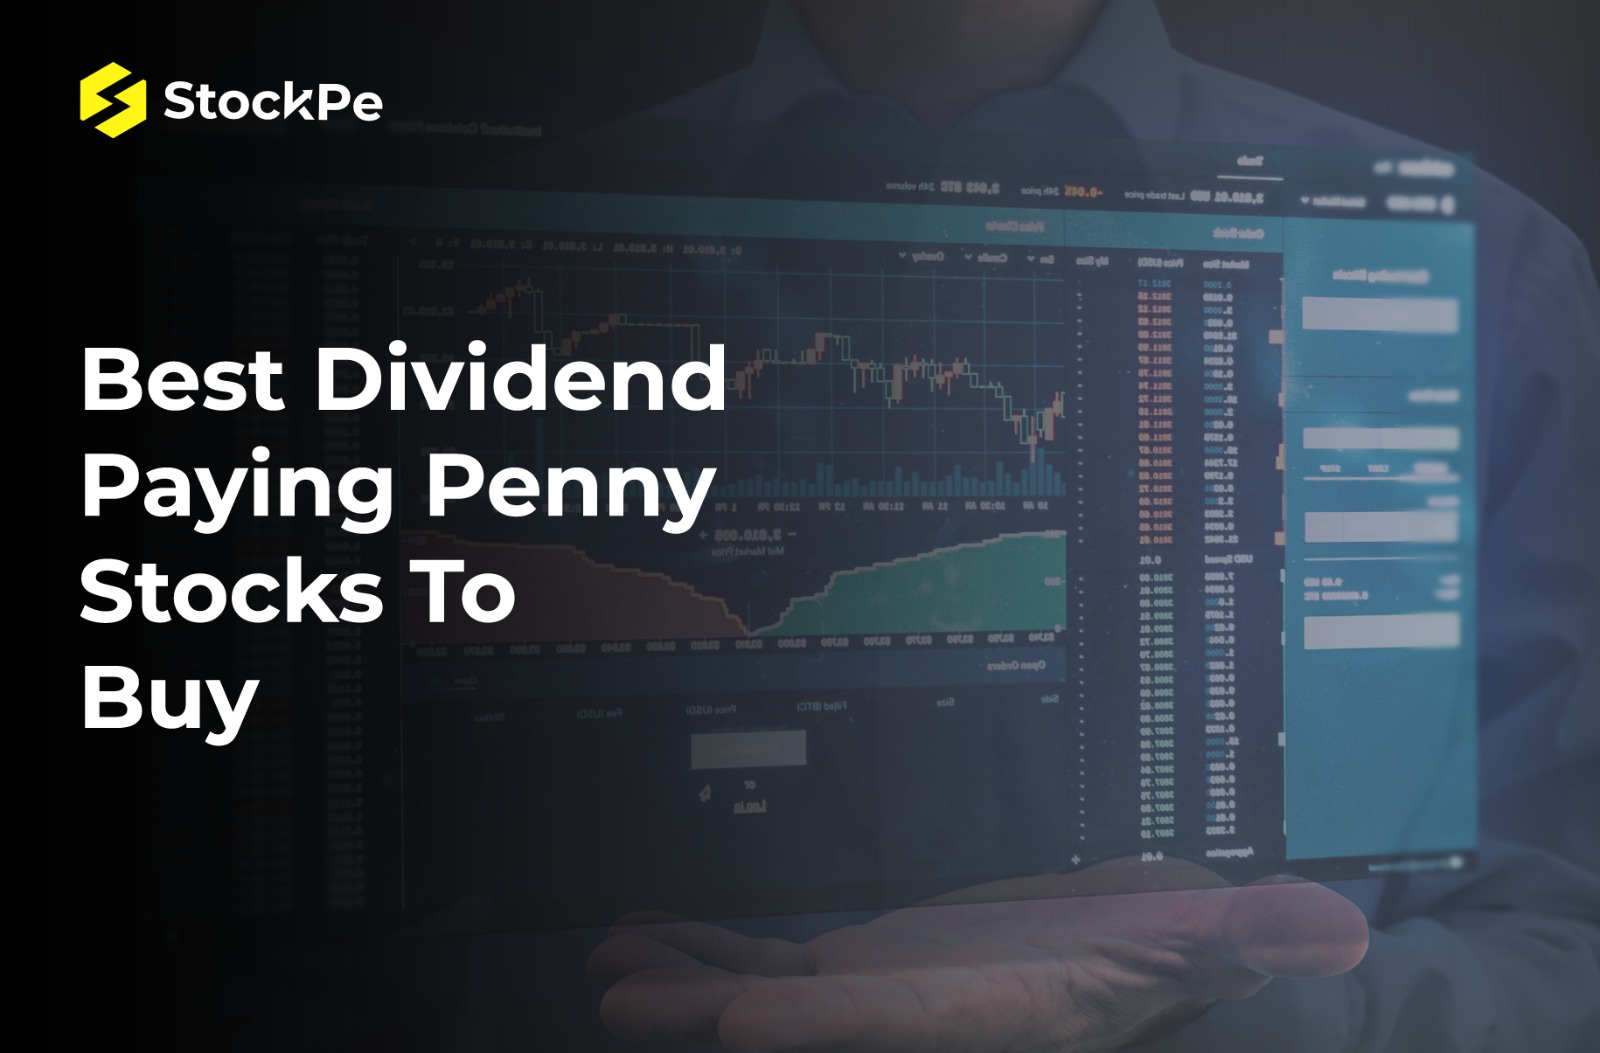 You are currently viewing Best Dividend Paying Penny Stocks To Buy